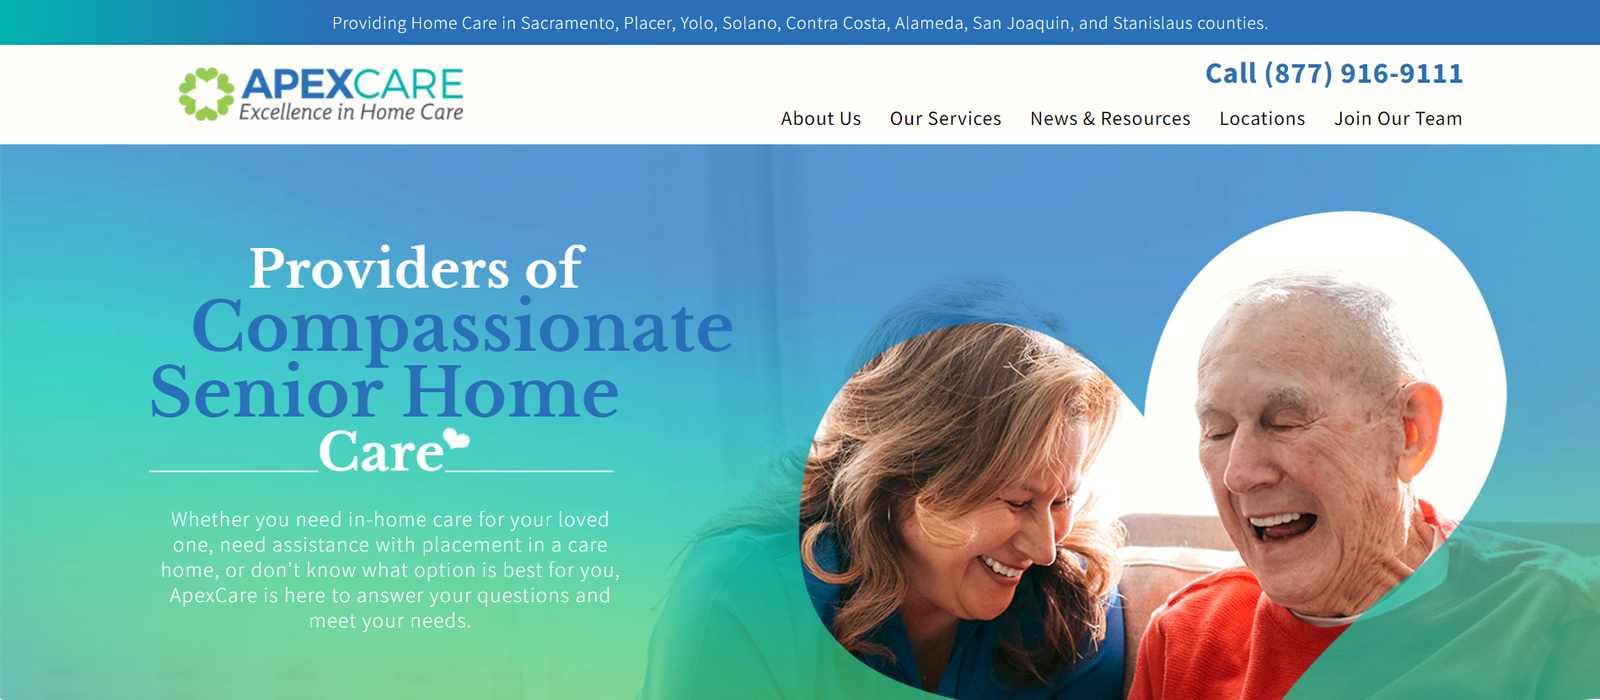 ApexCare Care Planning Tool